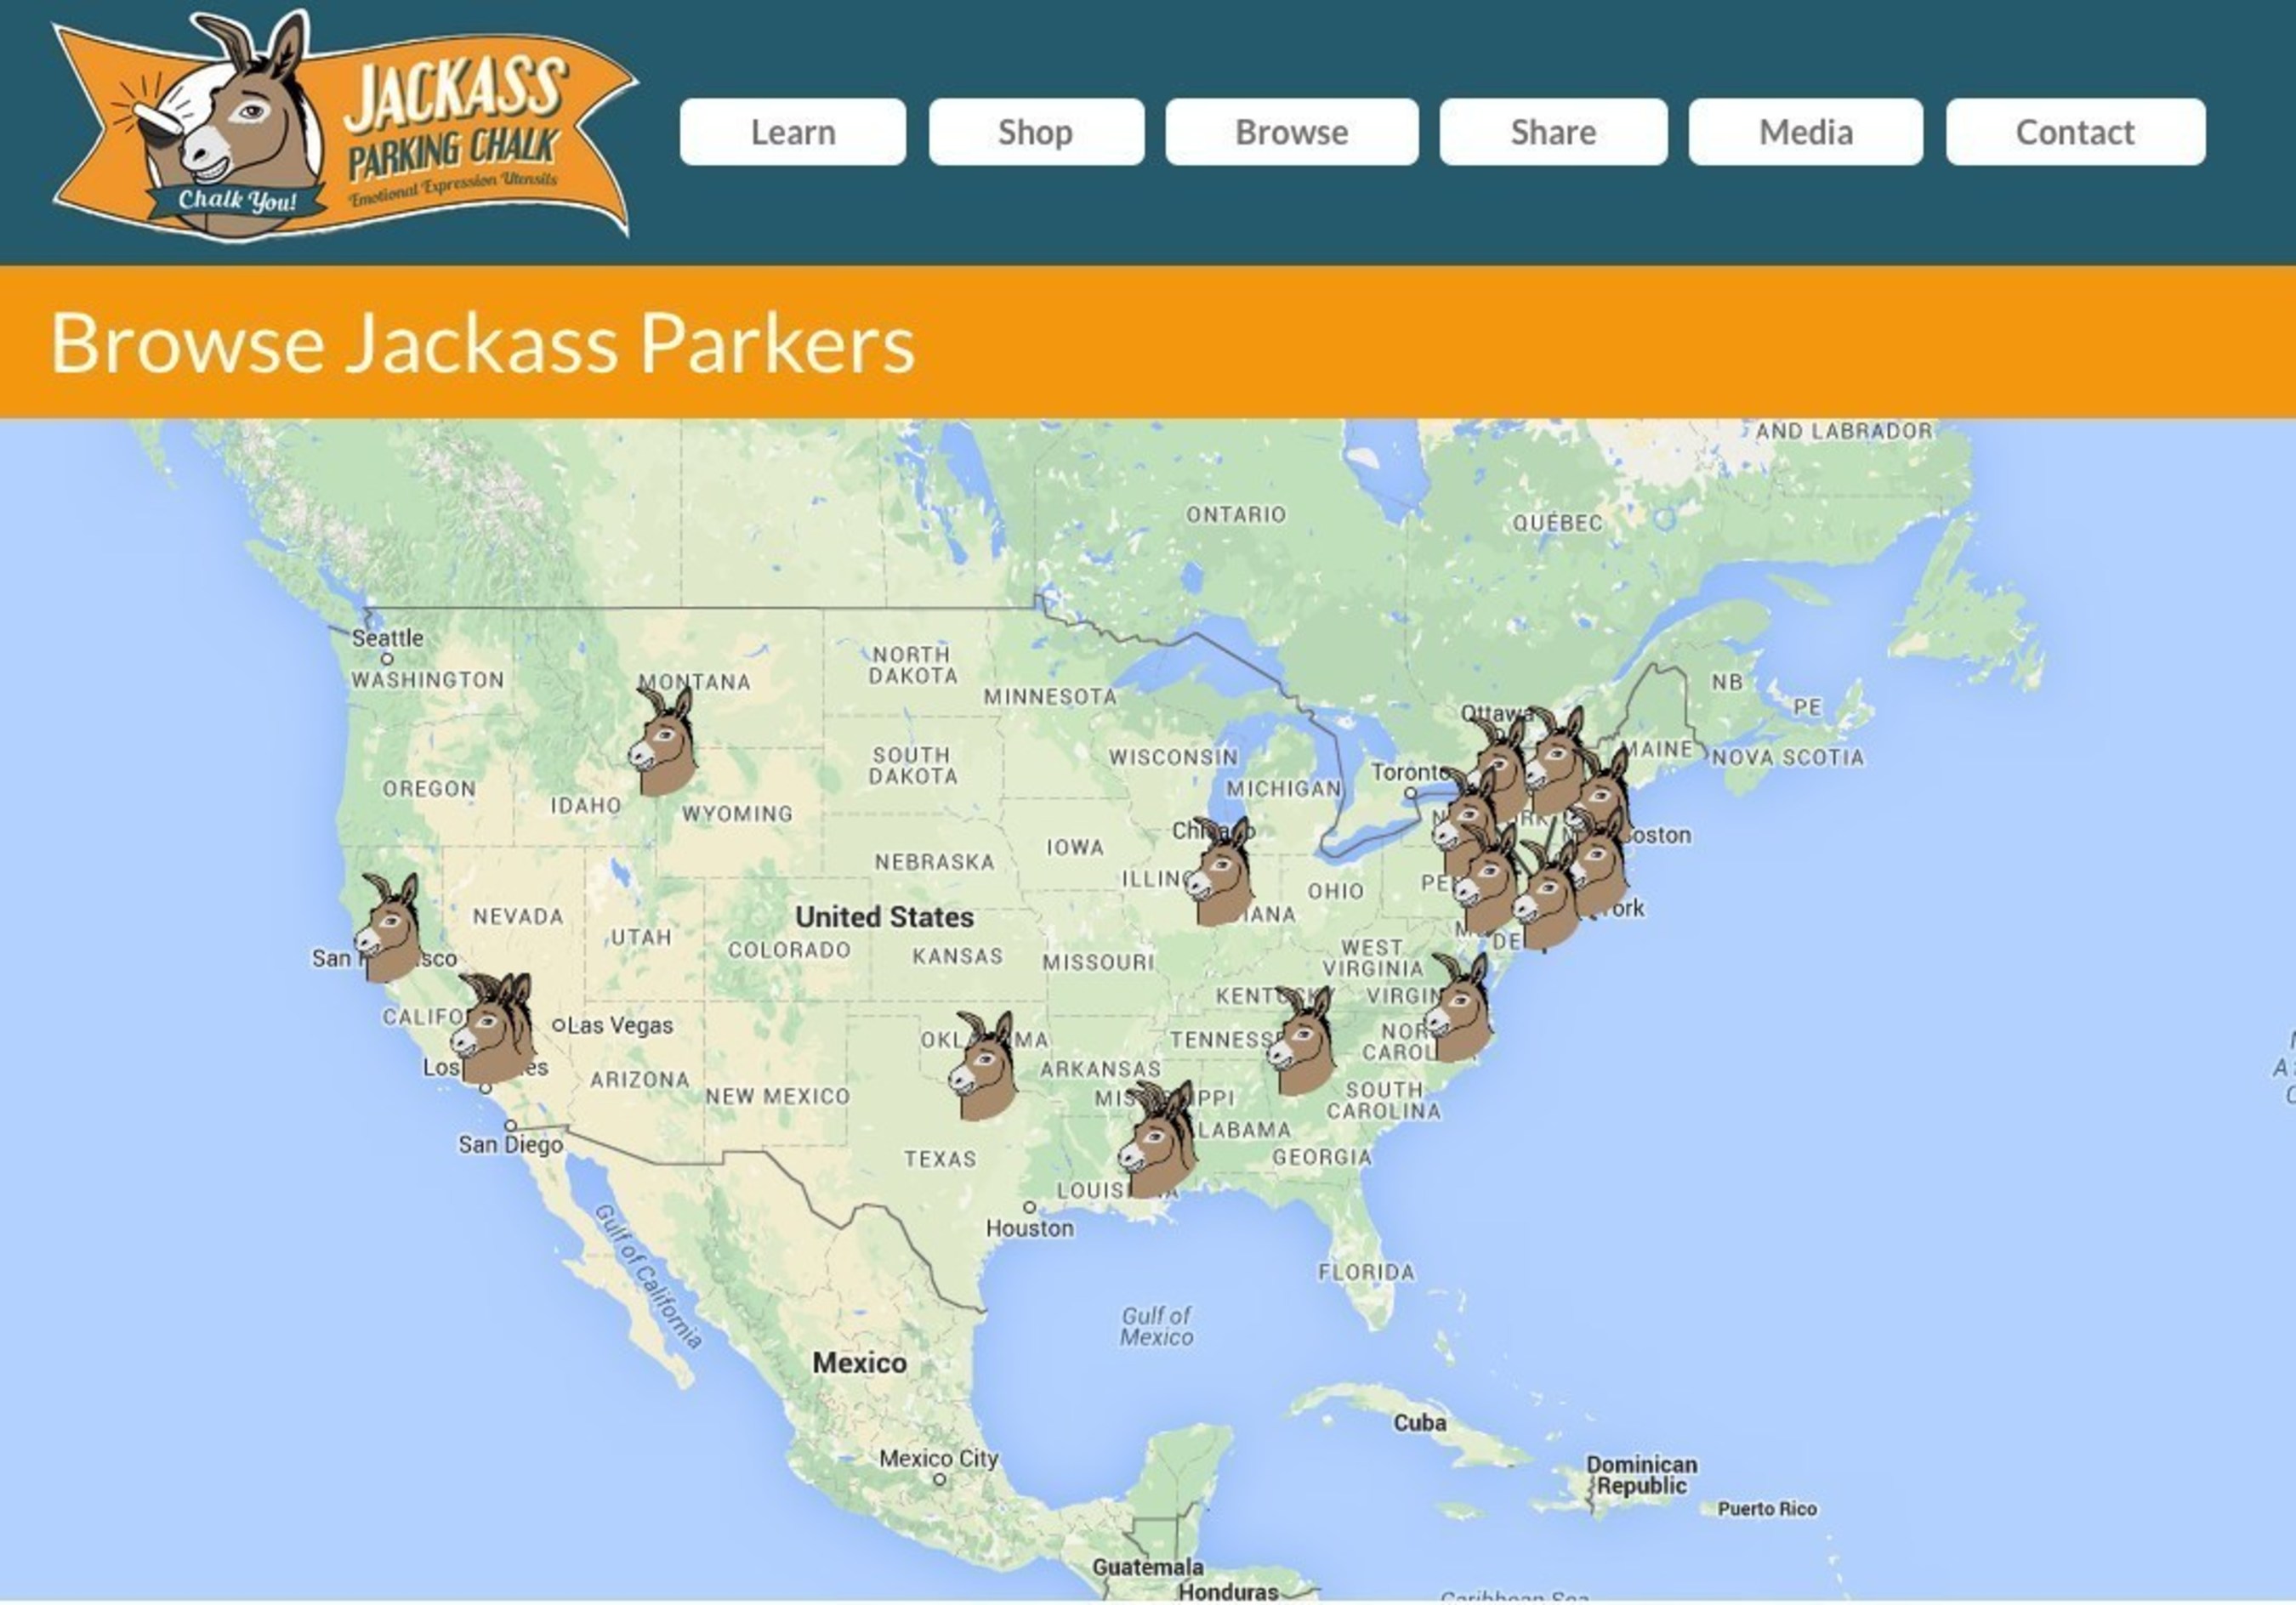 Browse Jackass Parkers at https://chalkyou.com